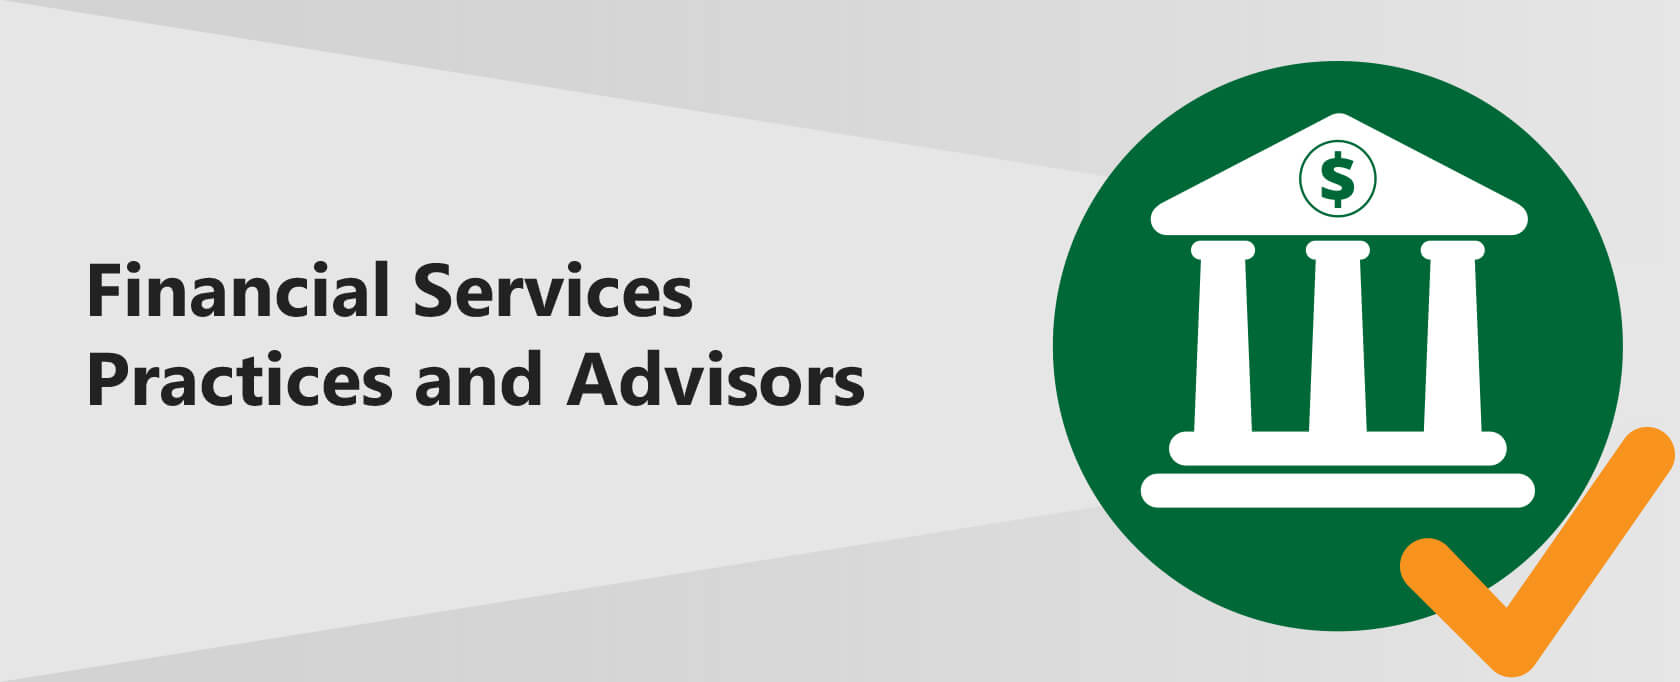 Financial Services Practices and Advisors